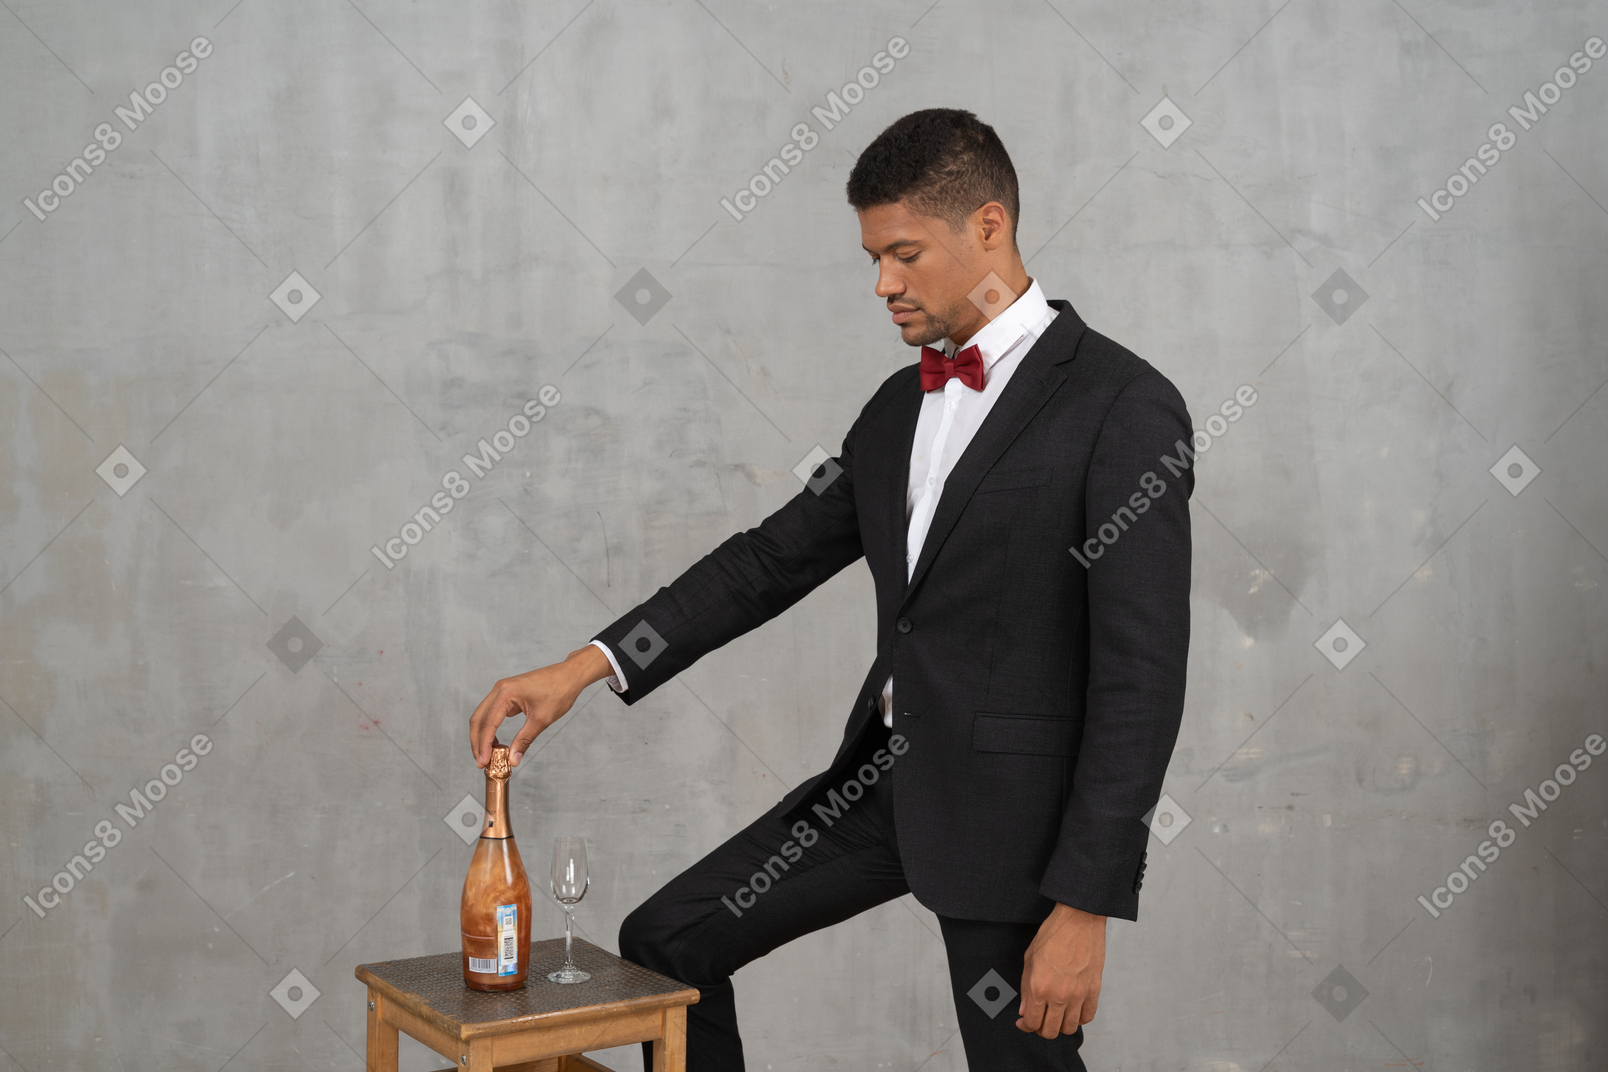 Man standing and looking down at a champagne bottle